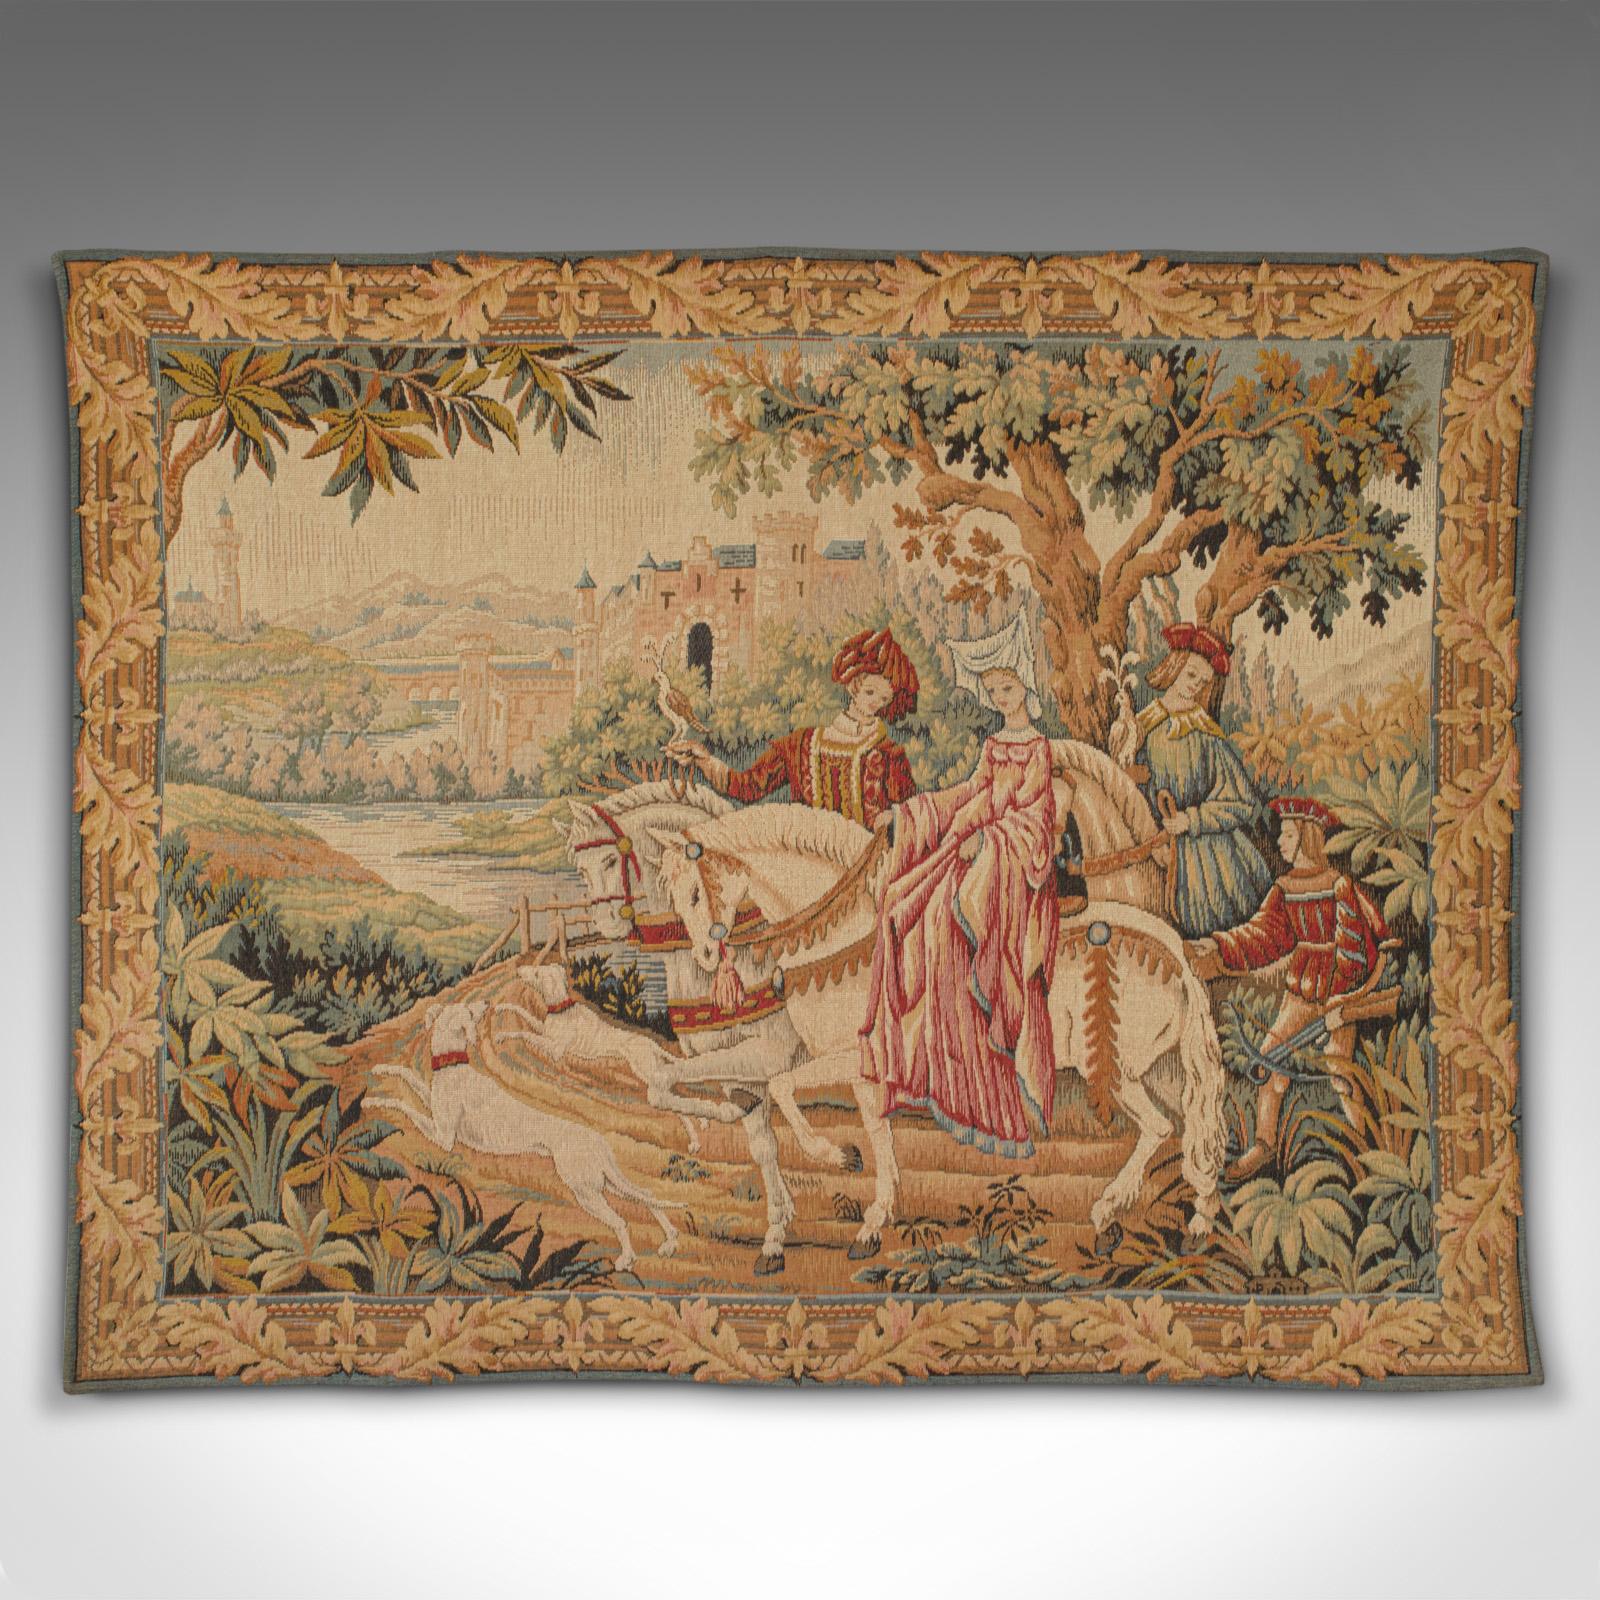 This is a vintage Continental tapestry. A French, needlepoint decorative panel by Marc Waymel, dated to rear 1982.

Classically appealing riding scene, the essence of 18th century nobility
Displays a desirable aged patina and in good order